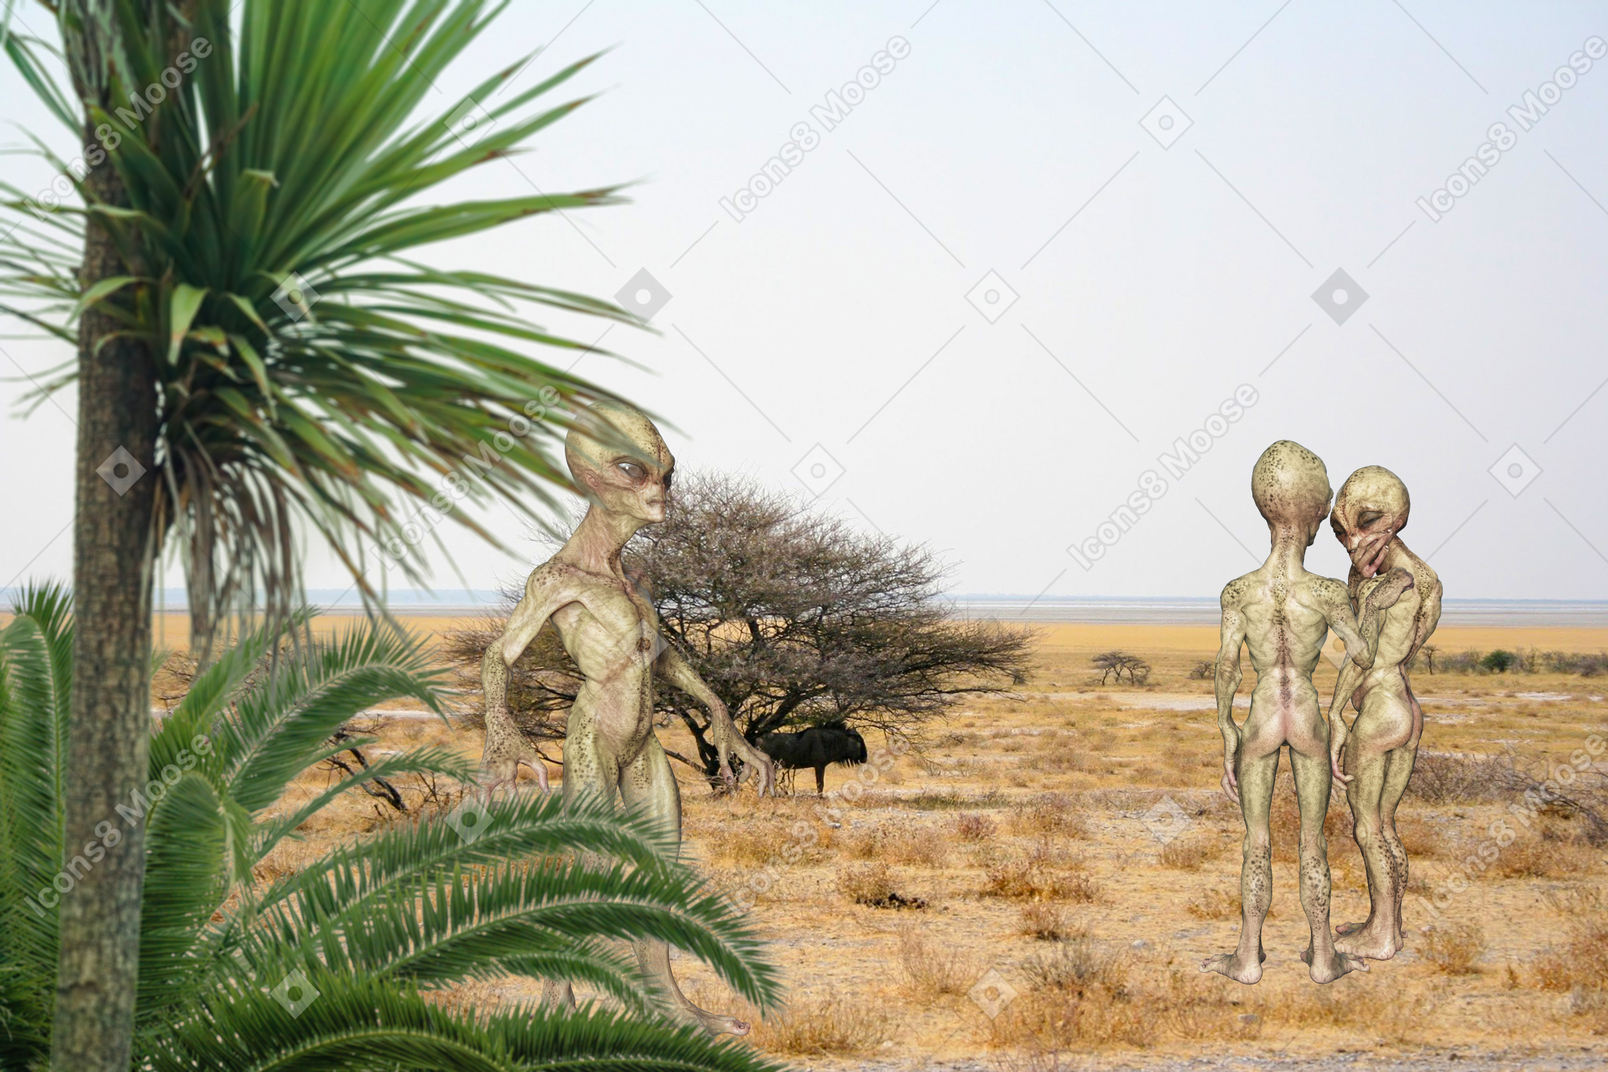 A group of aliens standing in the middle of a desert